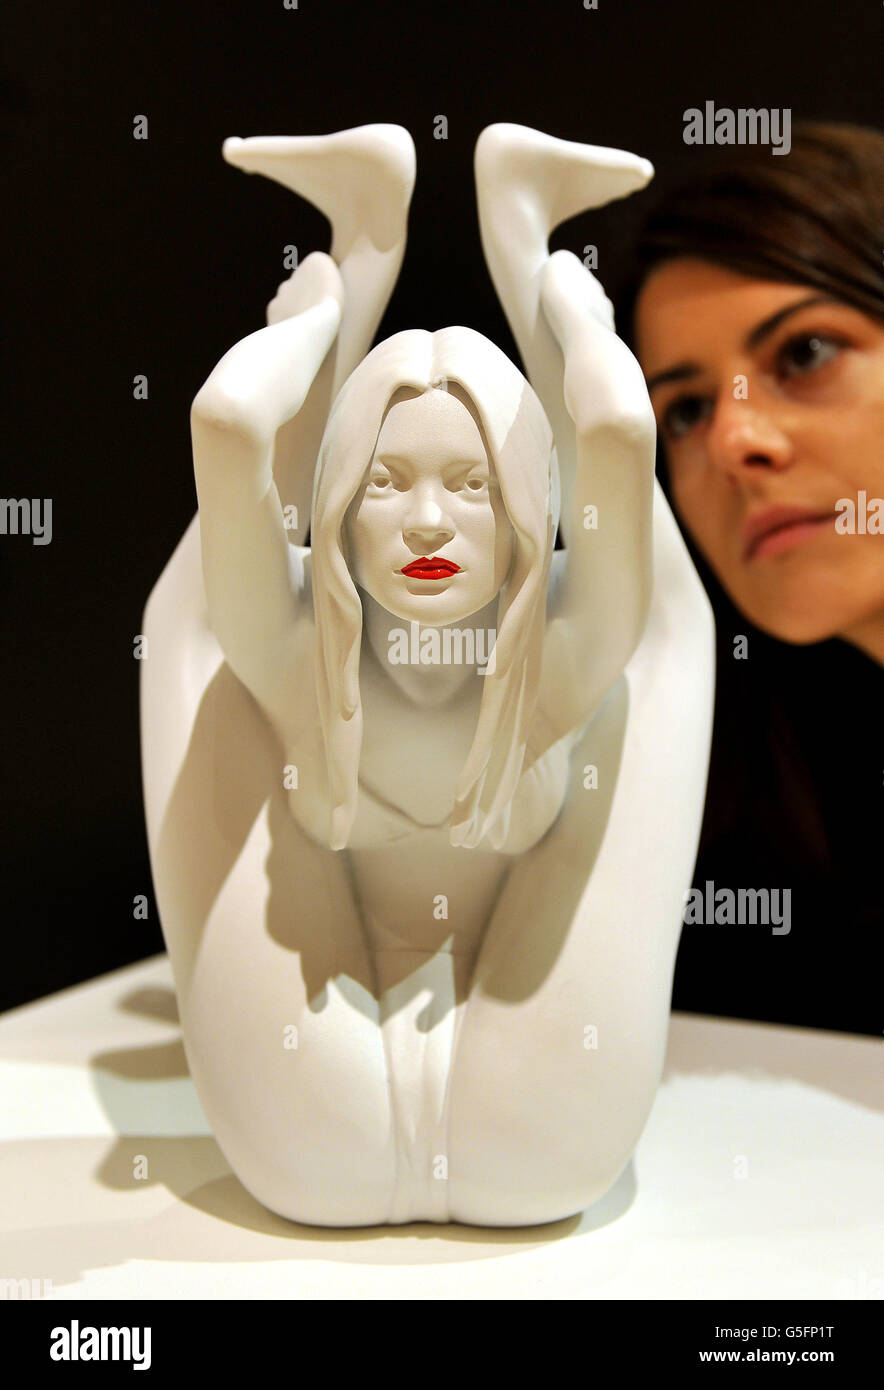 A female employee of Bonham's auctioneers in central London, studies a sculpture of supermodel Kate Moss performing Yoga produced by Marc Quinn called 'Caryatid', which goes up for auction this Thursday during the auction house's Contemporary Art &amp; Design auction, with a price tag of between &pound;50,000-70,000. Stock Photo